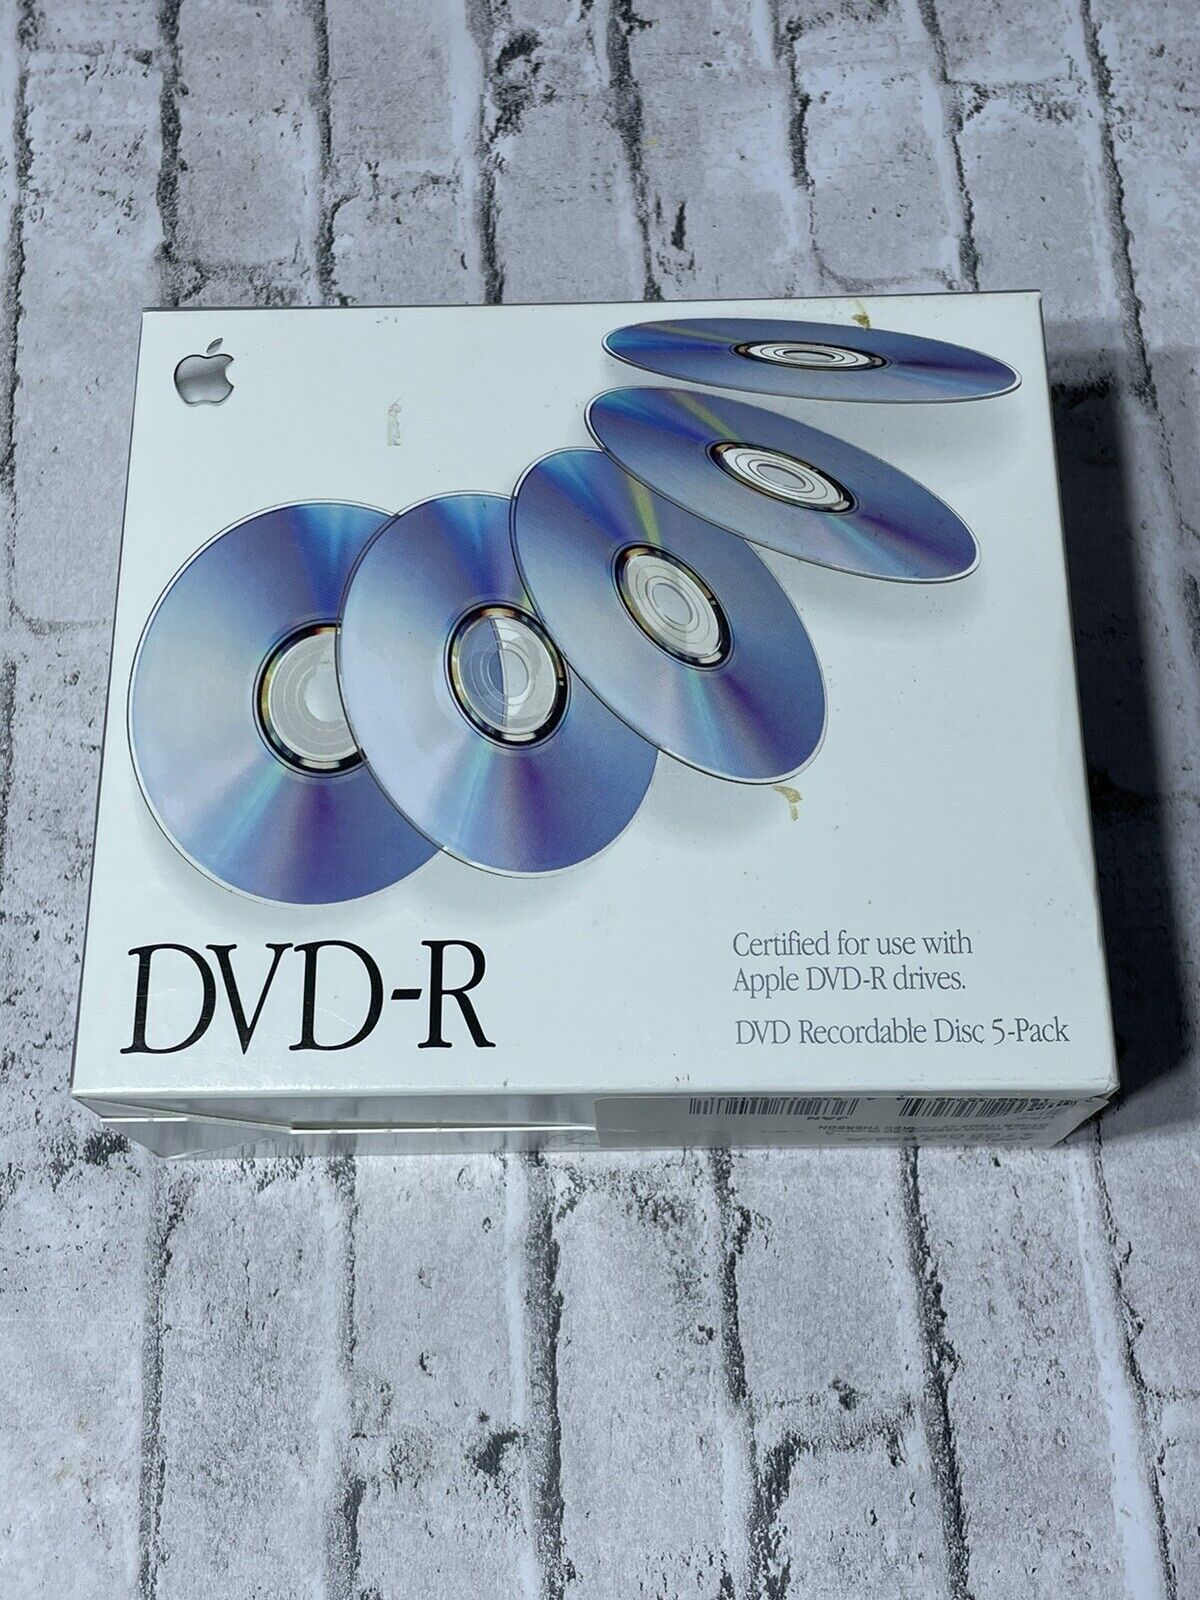 Vintage Apple DVD-R 4.7GB Recordable Disc 5-Pack M8405ZM/A New Sealed